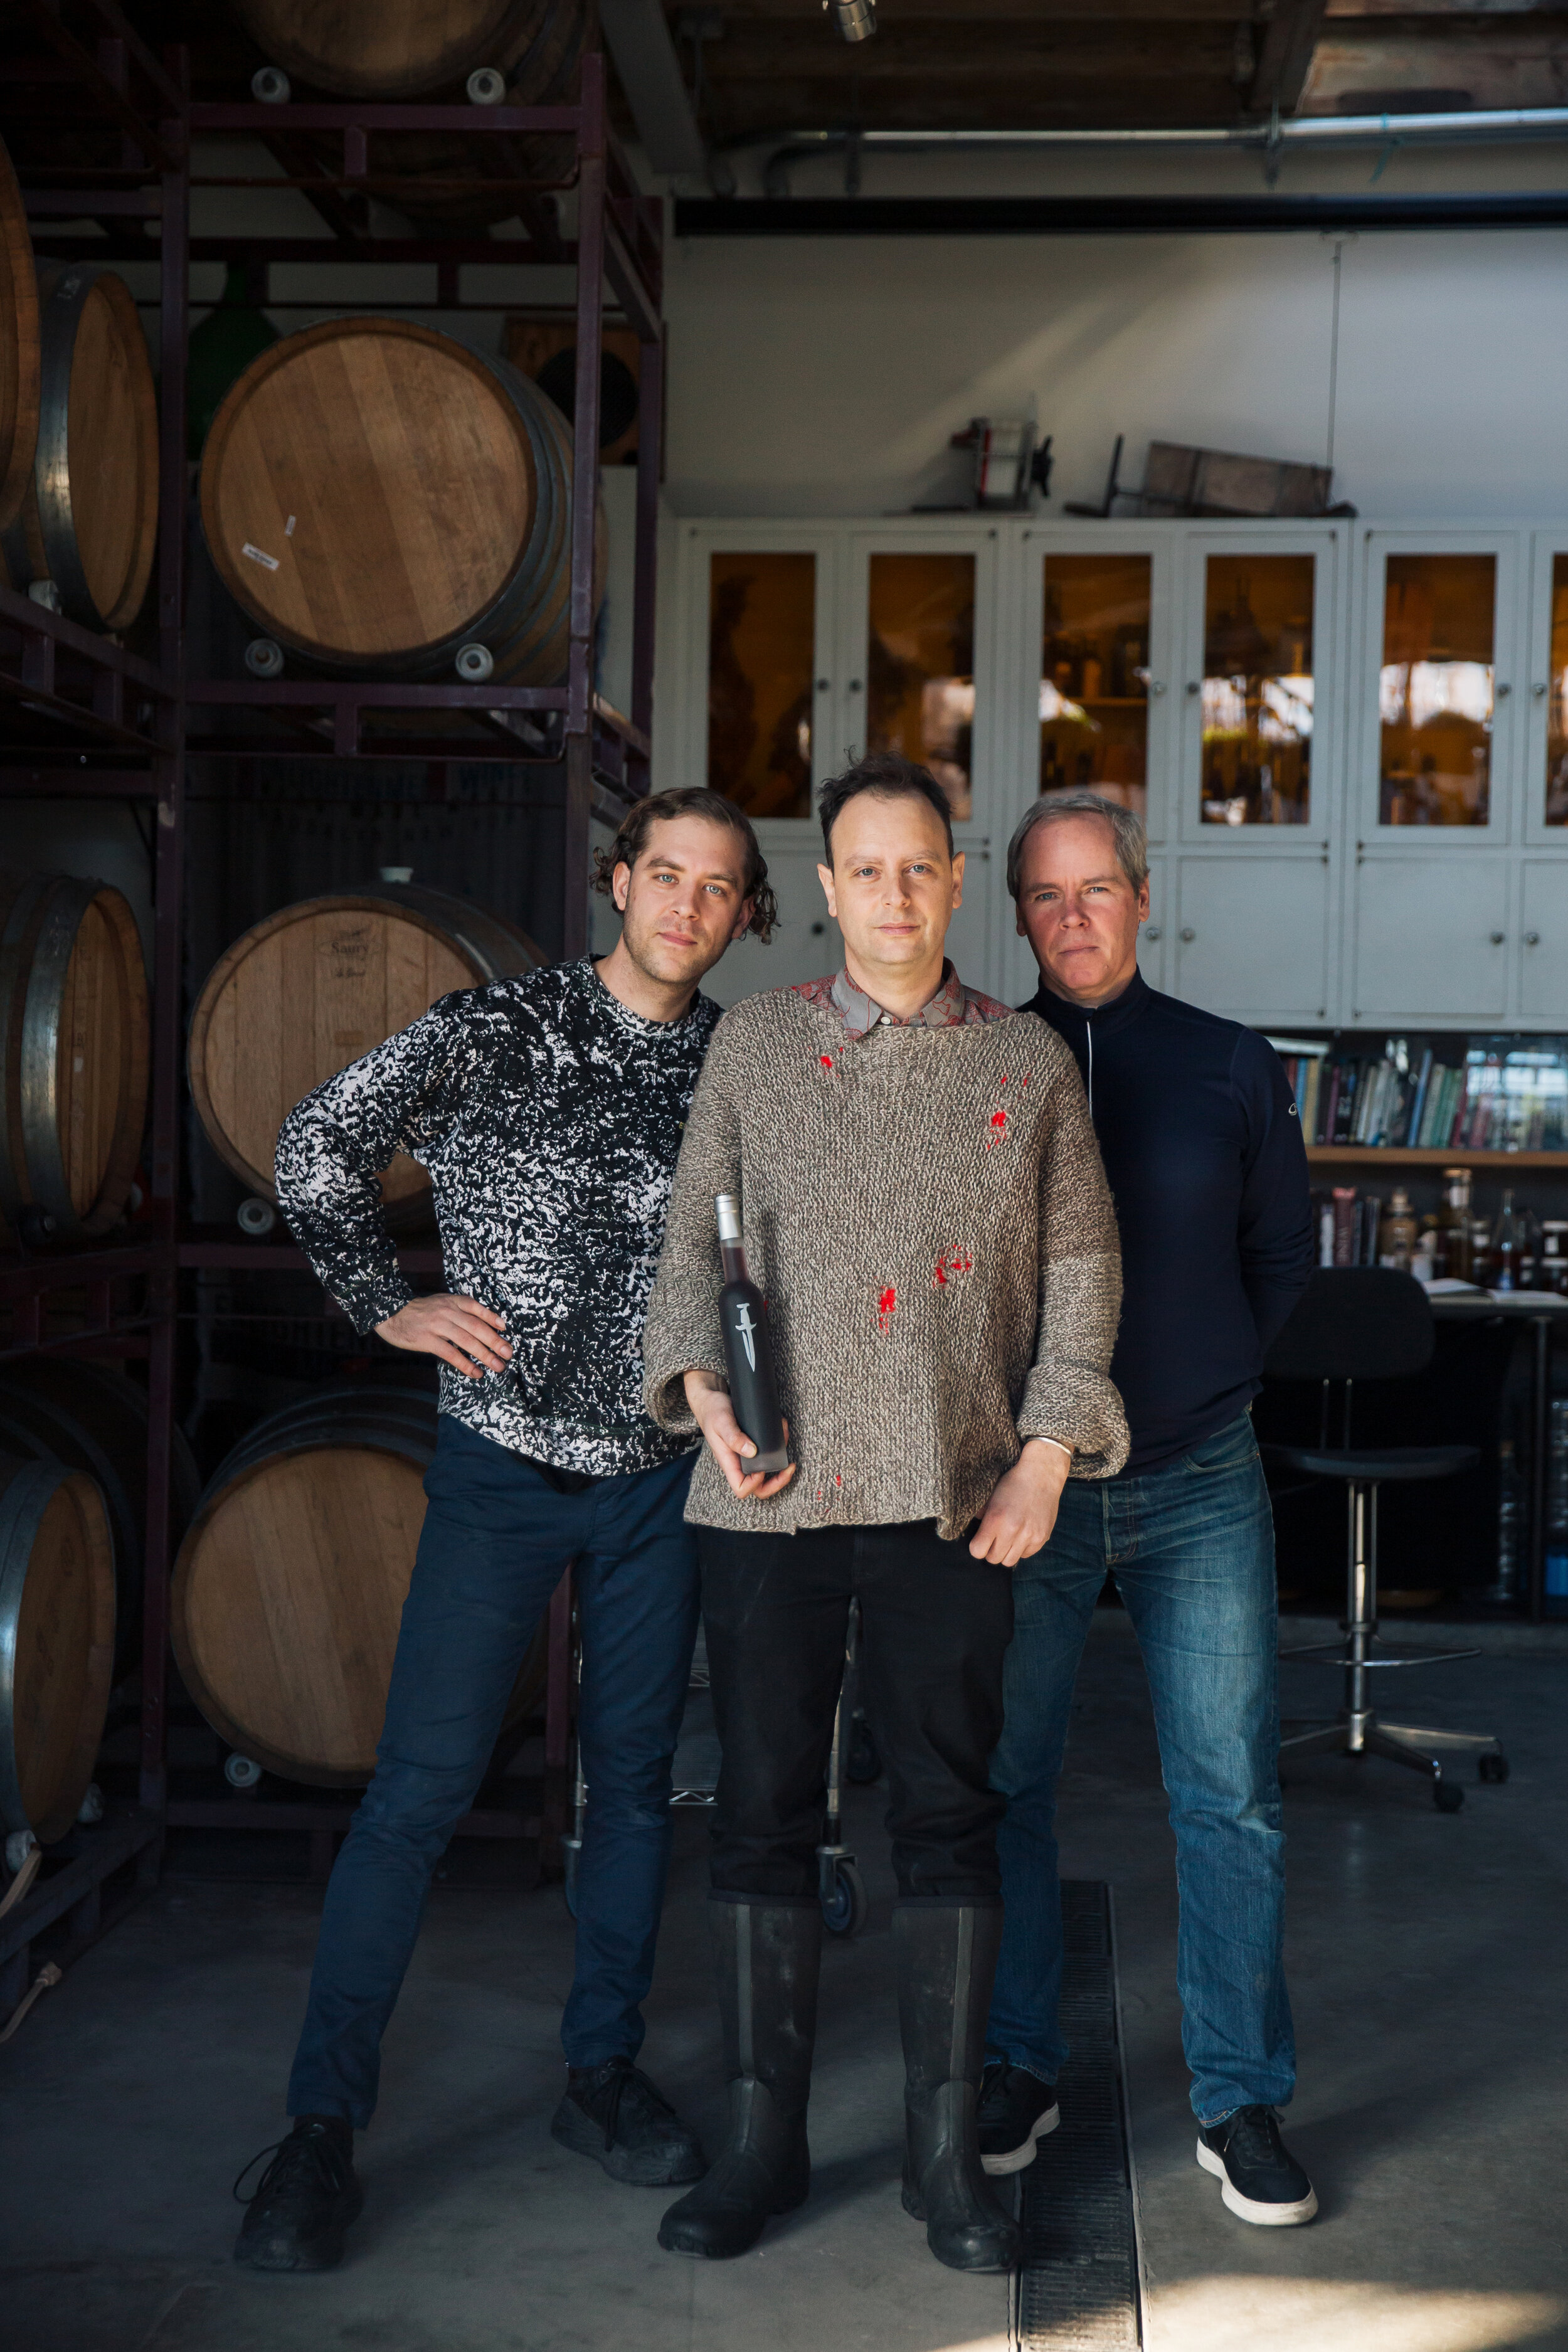  Arley Marks, Raphael Lyon, and Anthony Rock at Enlightenment Wines in Bushwick    https://www.nytimes.com/2020/01/28/nyregion/mead-honey-wine-brooklyn-new-york.html 